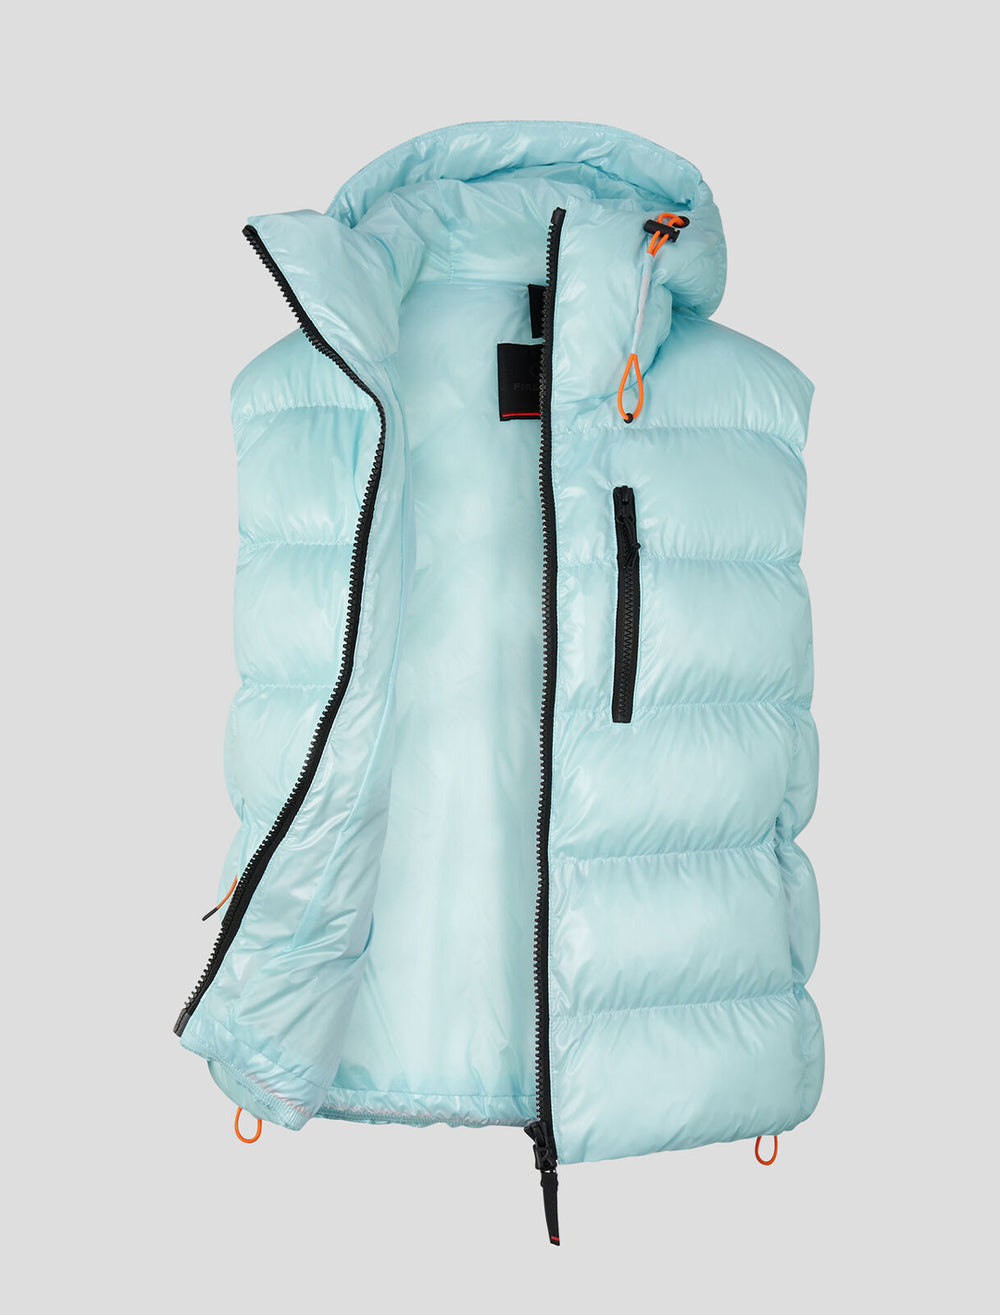 Flat lay of Bogner Fire + Ice's naima vest in pale blue.